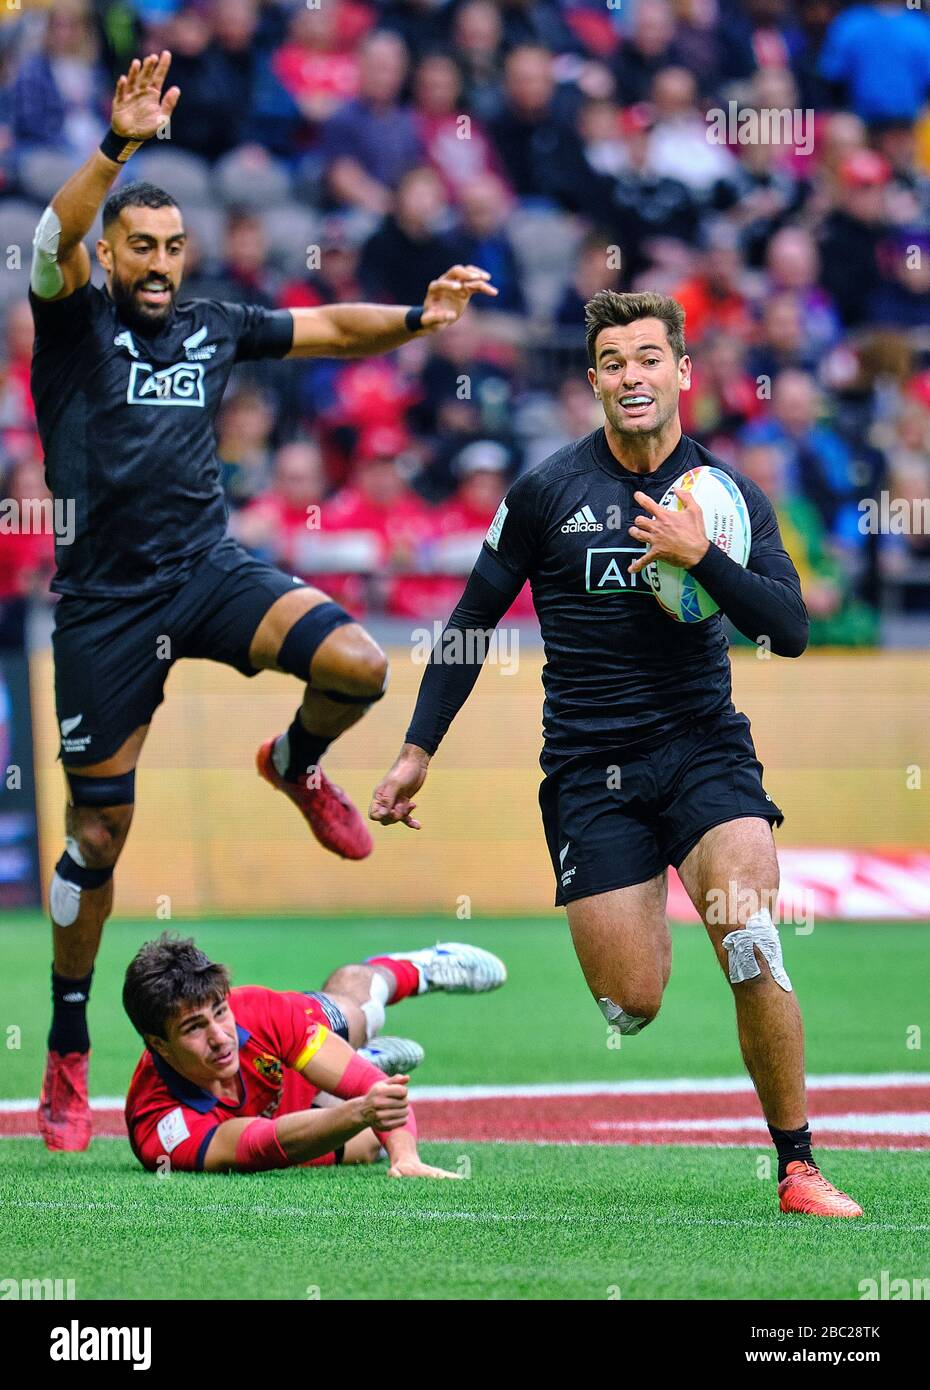 Vancouver, Canada. 7th March, 2020. Andrew Knewstubb #8 of New Zealand gets by Spain tackler in Match #14 during Day 1 - 2020 HSBC World Rugby Sevens Stock Photo